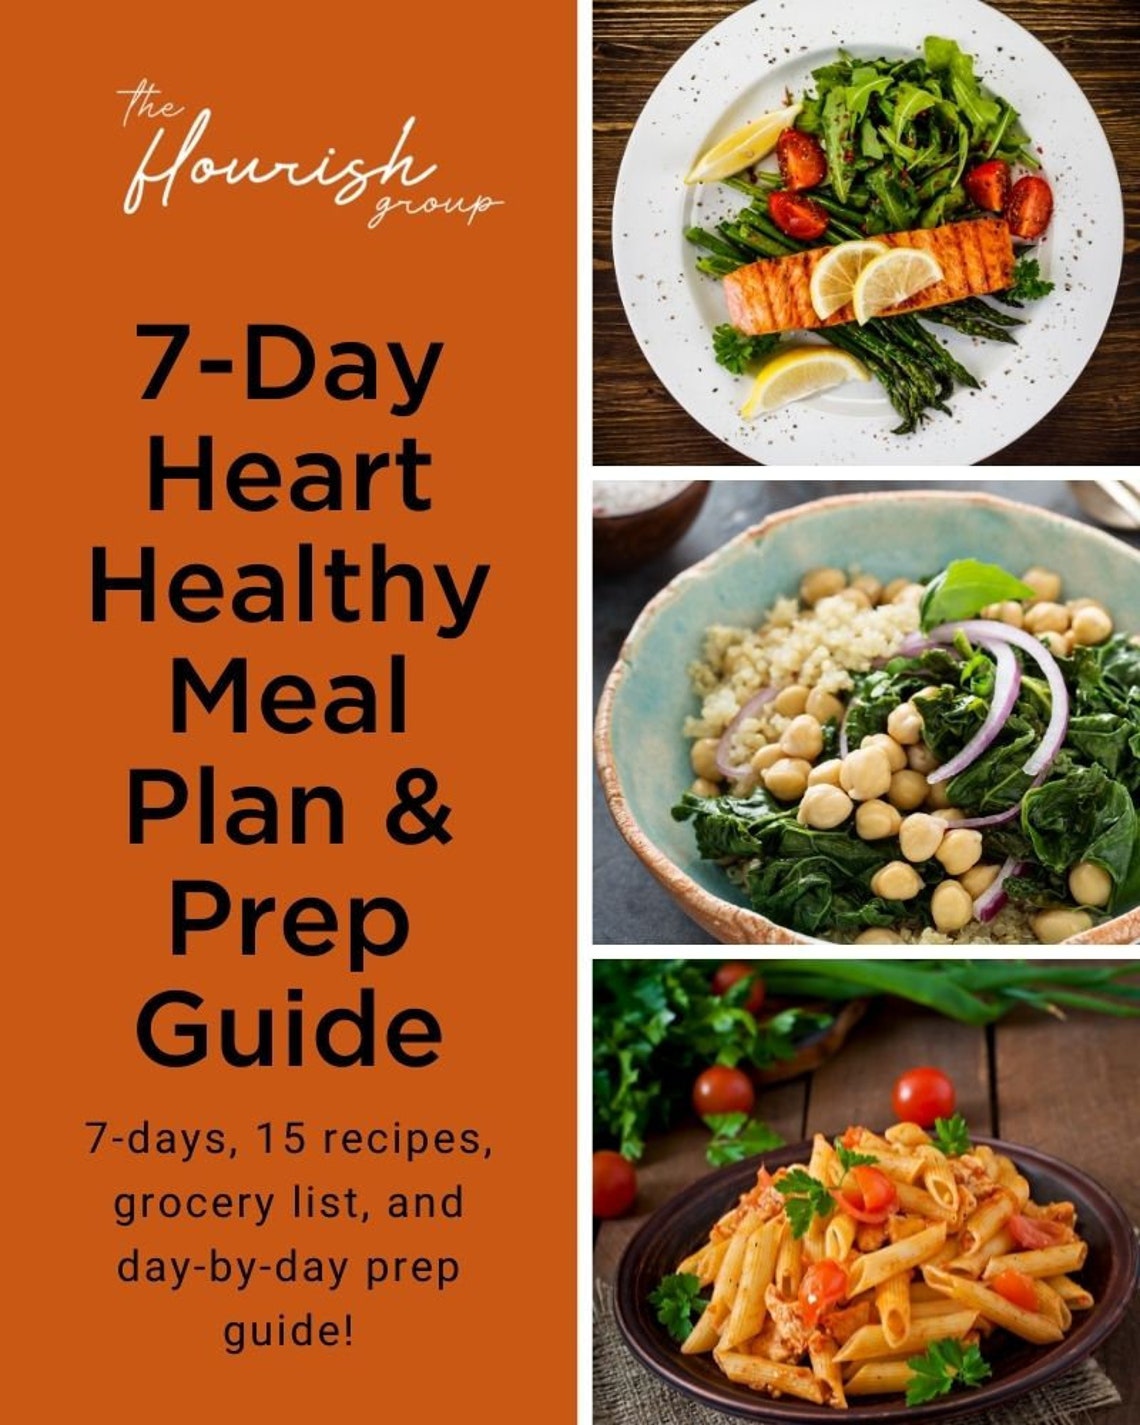 7-Day Heart Health Meal Plan with Prep Guide. 15 recipes | Etsy